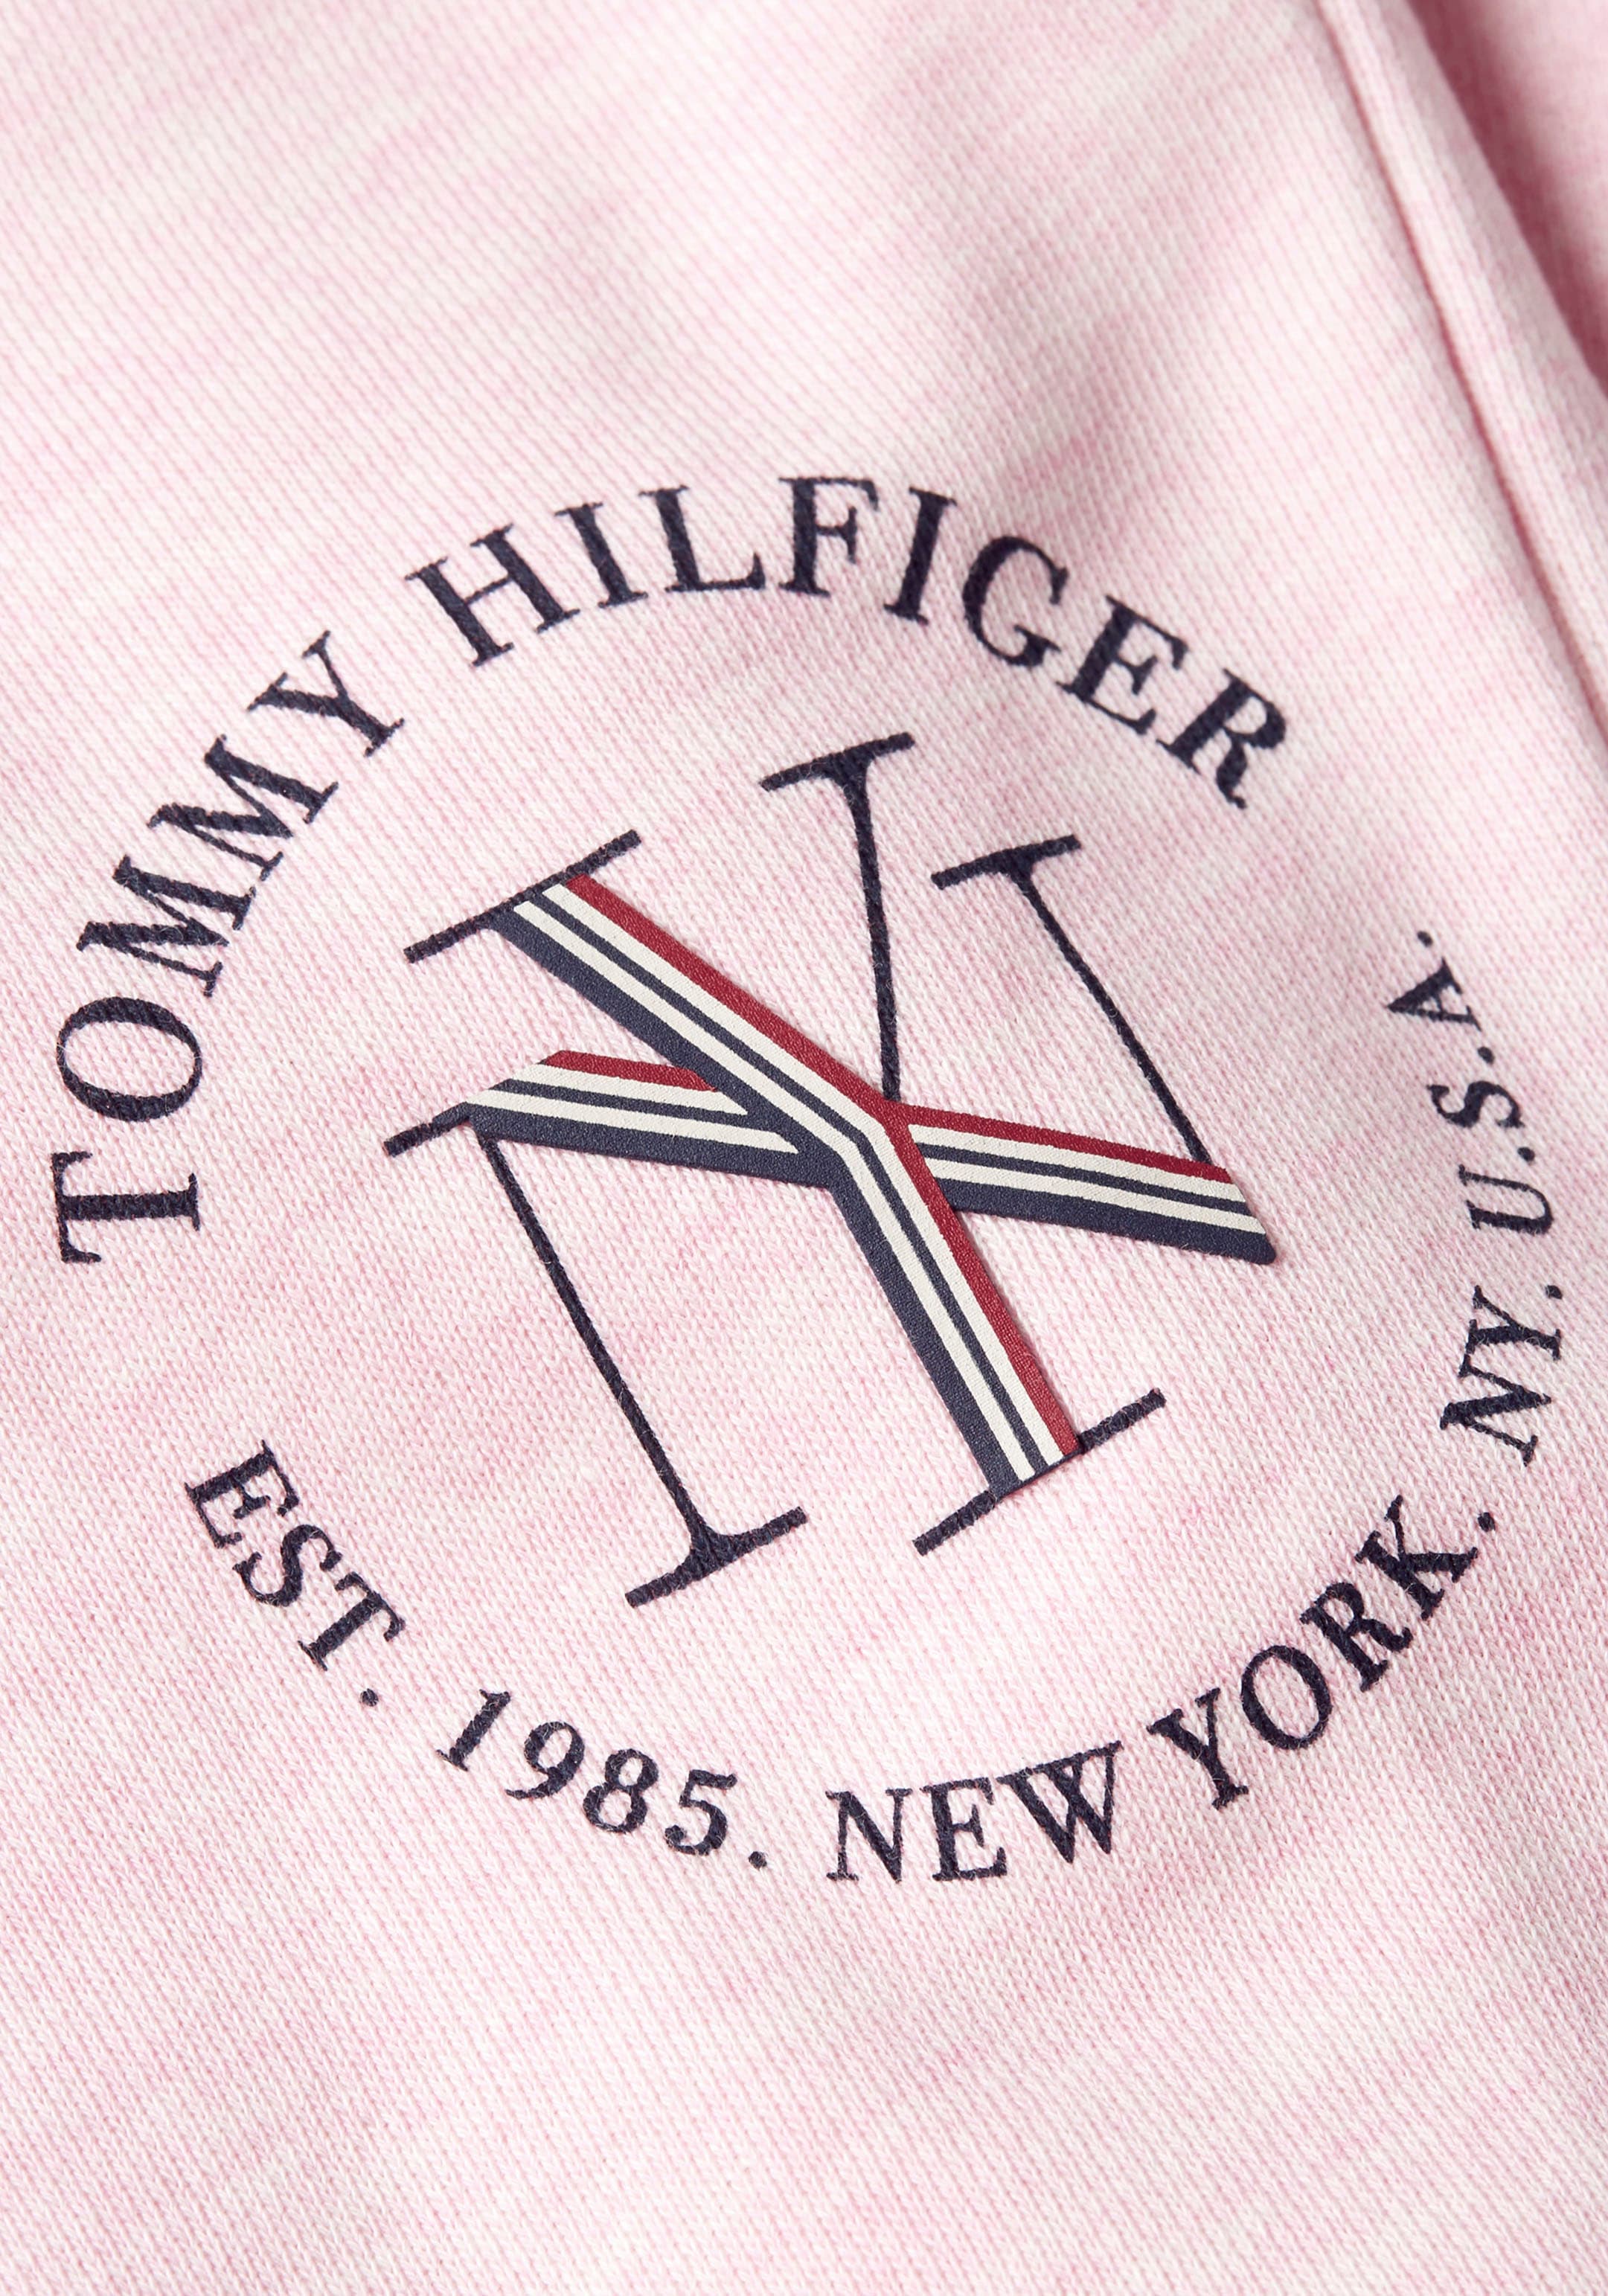 ♕ mit Hilfiger Hilfiger SWEATPANTS«, Sweatpants Tommy NYC Markenlabel bei »TAPERED Tommy ROUNDALL